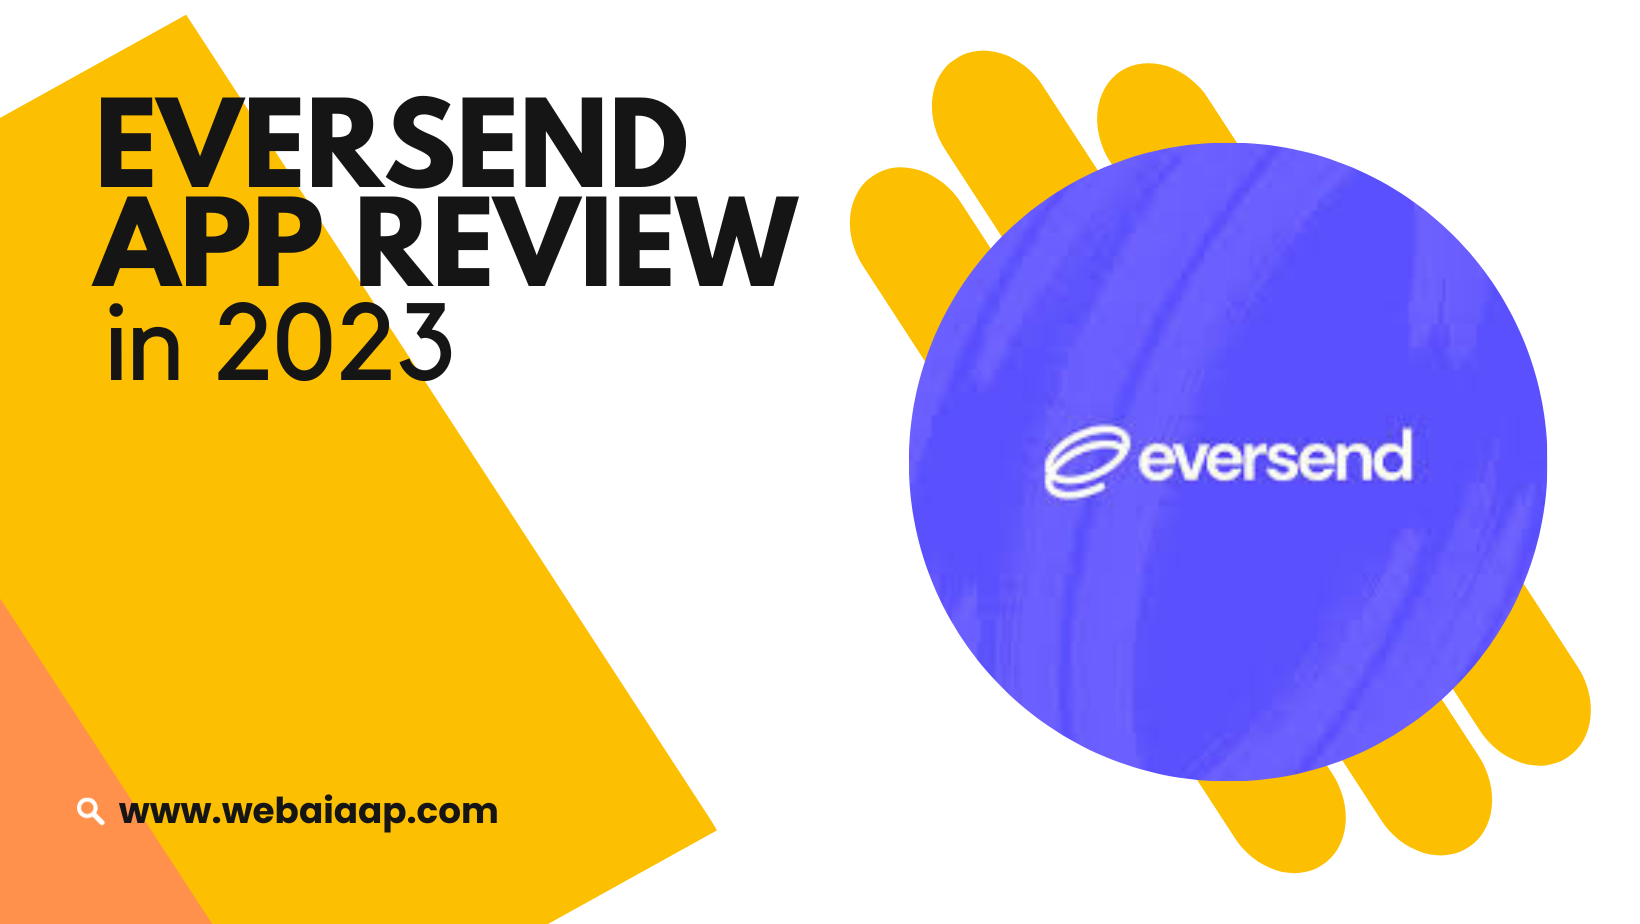 Eversend App Review in 2023